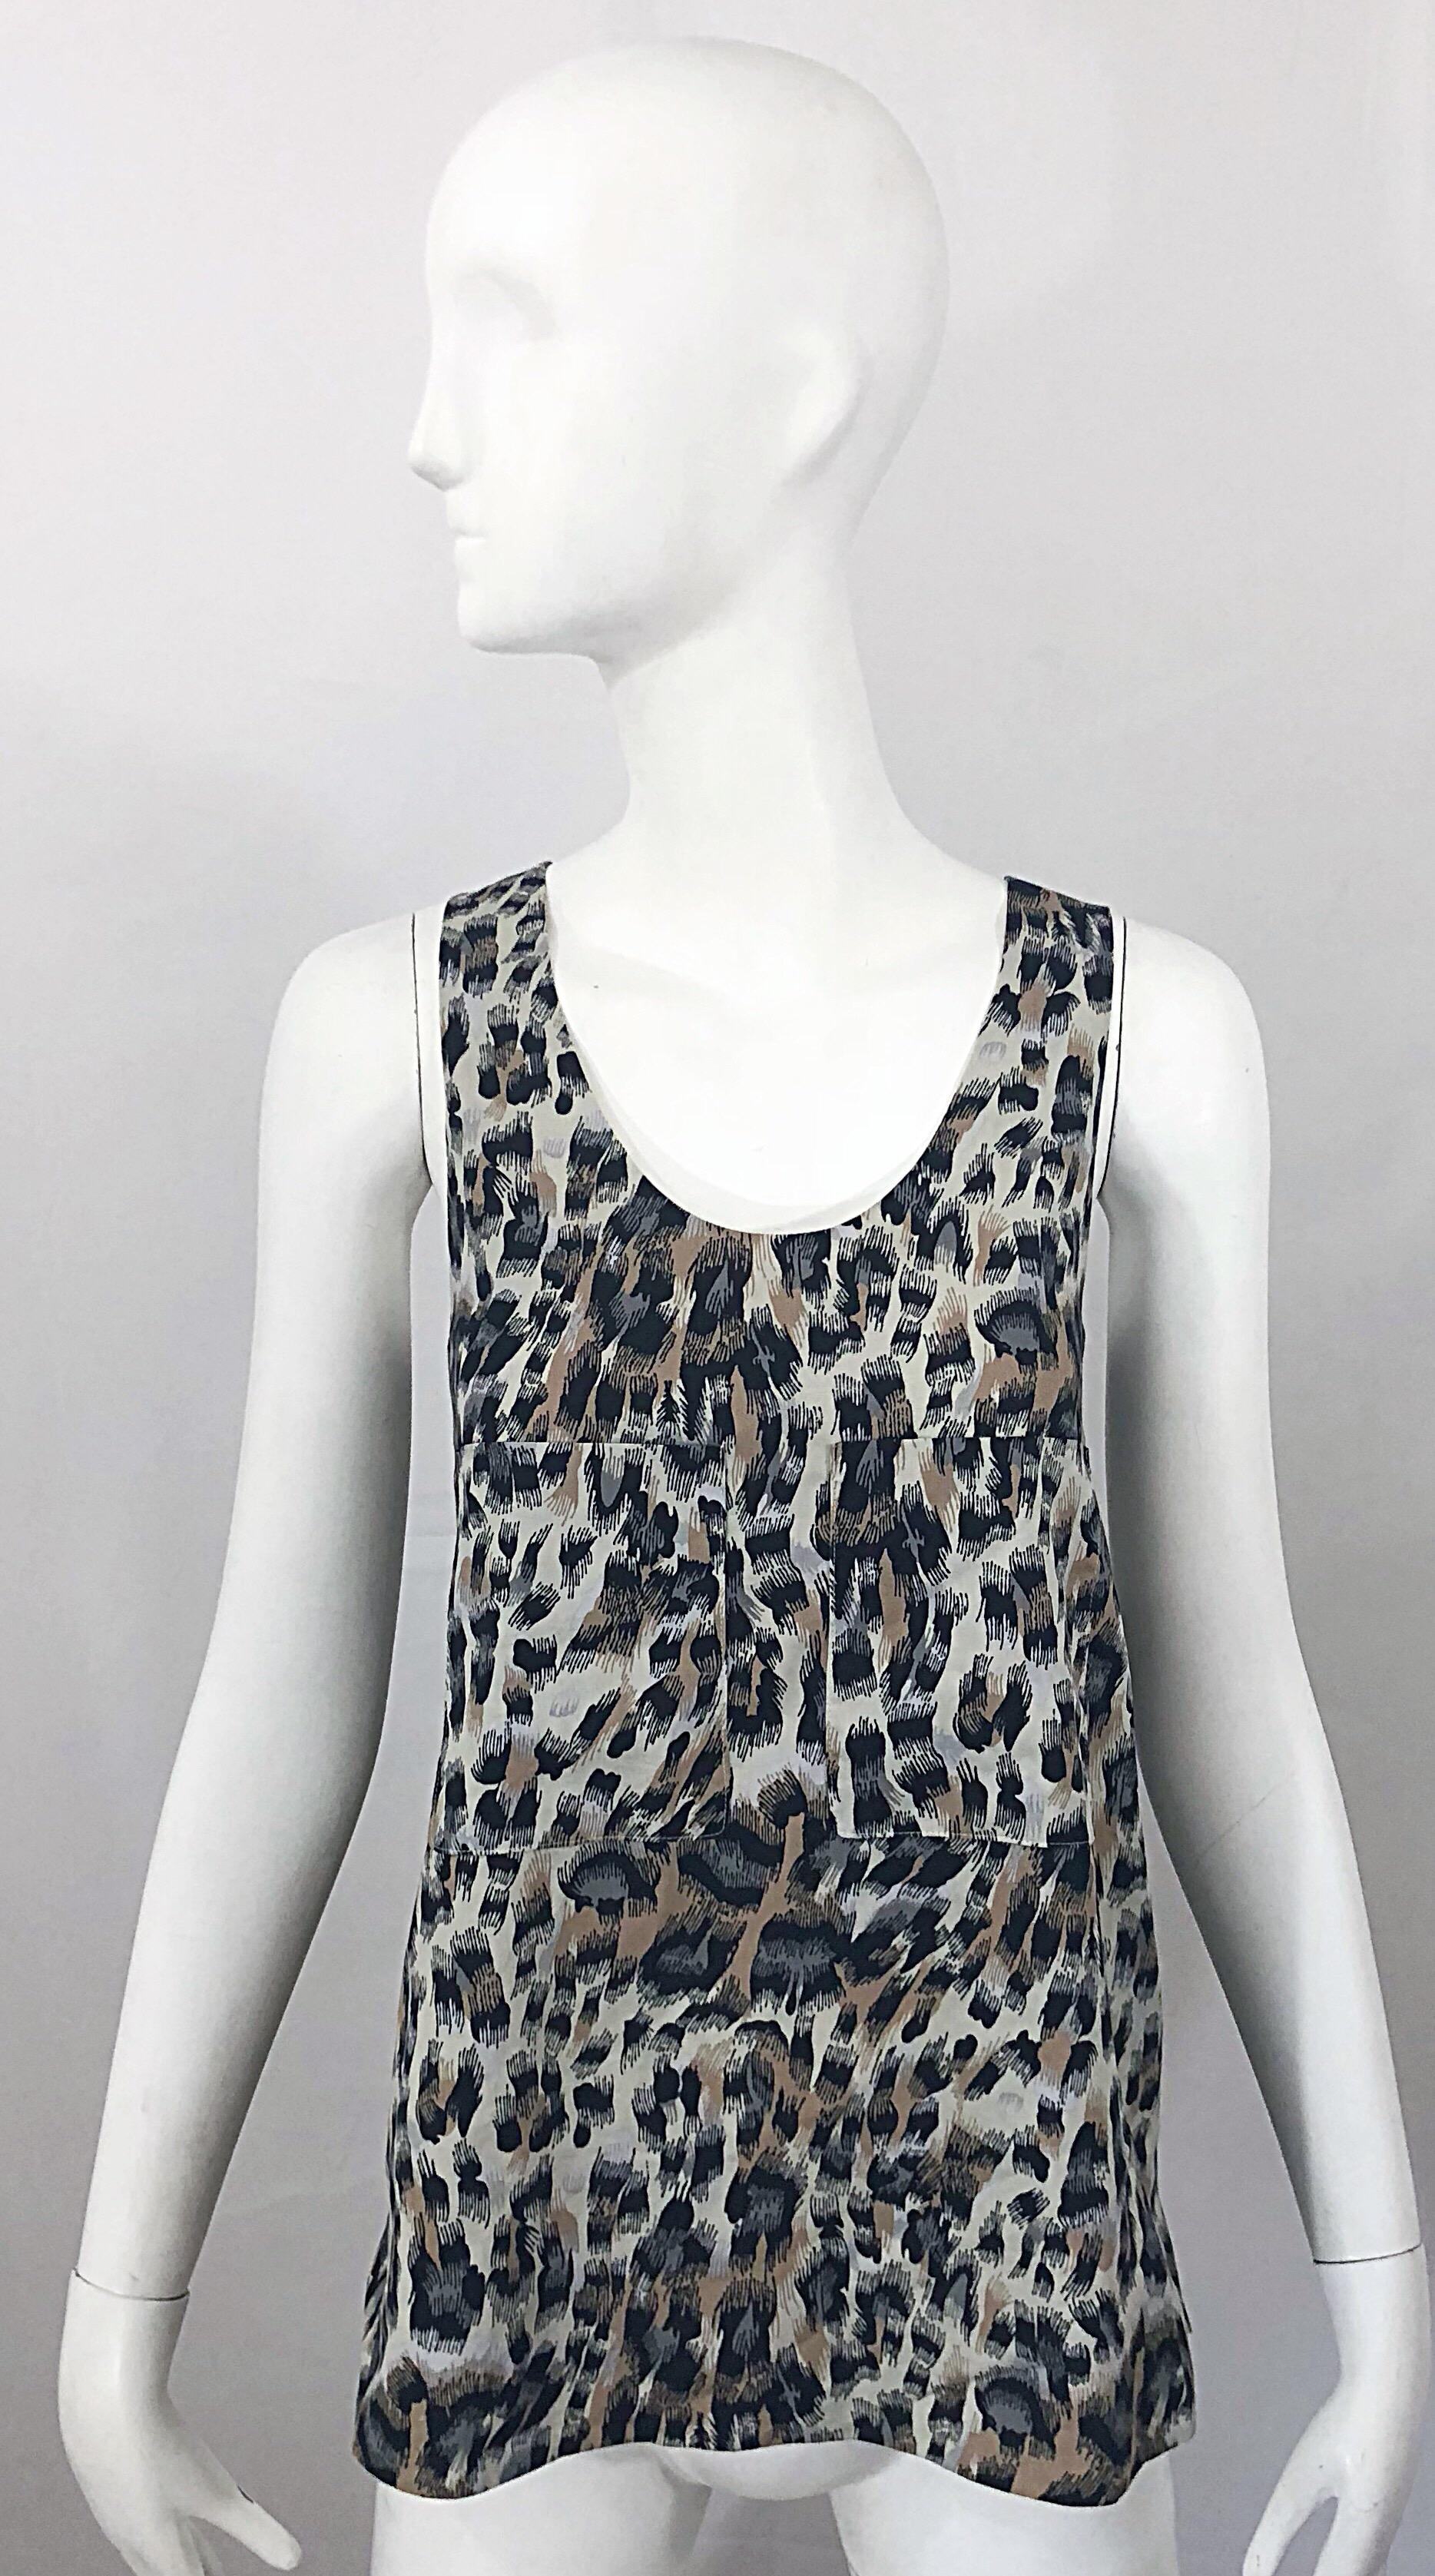 Chic vintage late 90s CHLOE leopard cheetah print sleeveless tunic shirt! Features flattering animal prints in grey, brown, ivory and tan throughout. Pocket at each breast. Vents at each side of the hem. Soft cotton, and fully lined in silk. Fitted